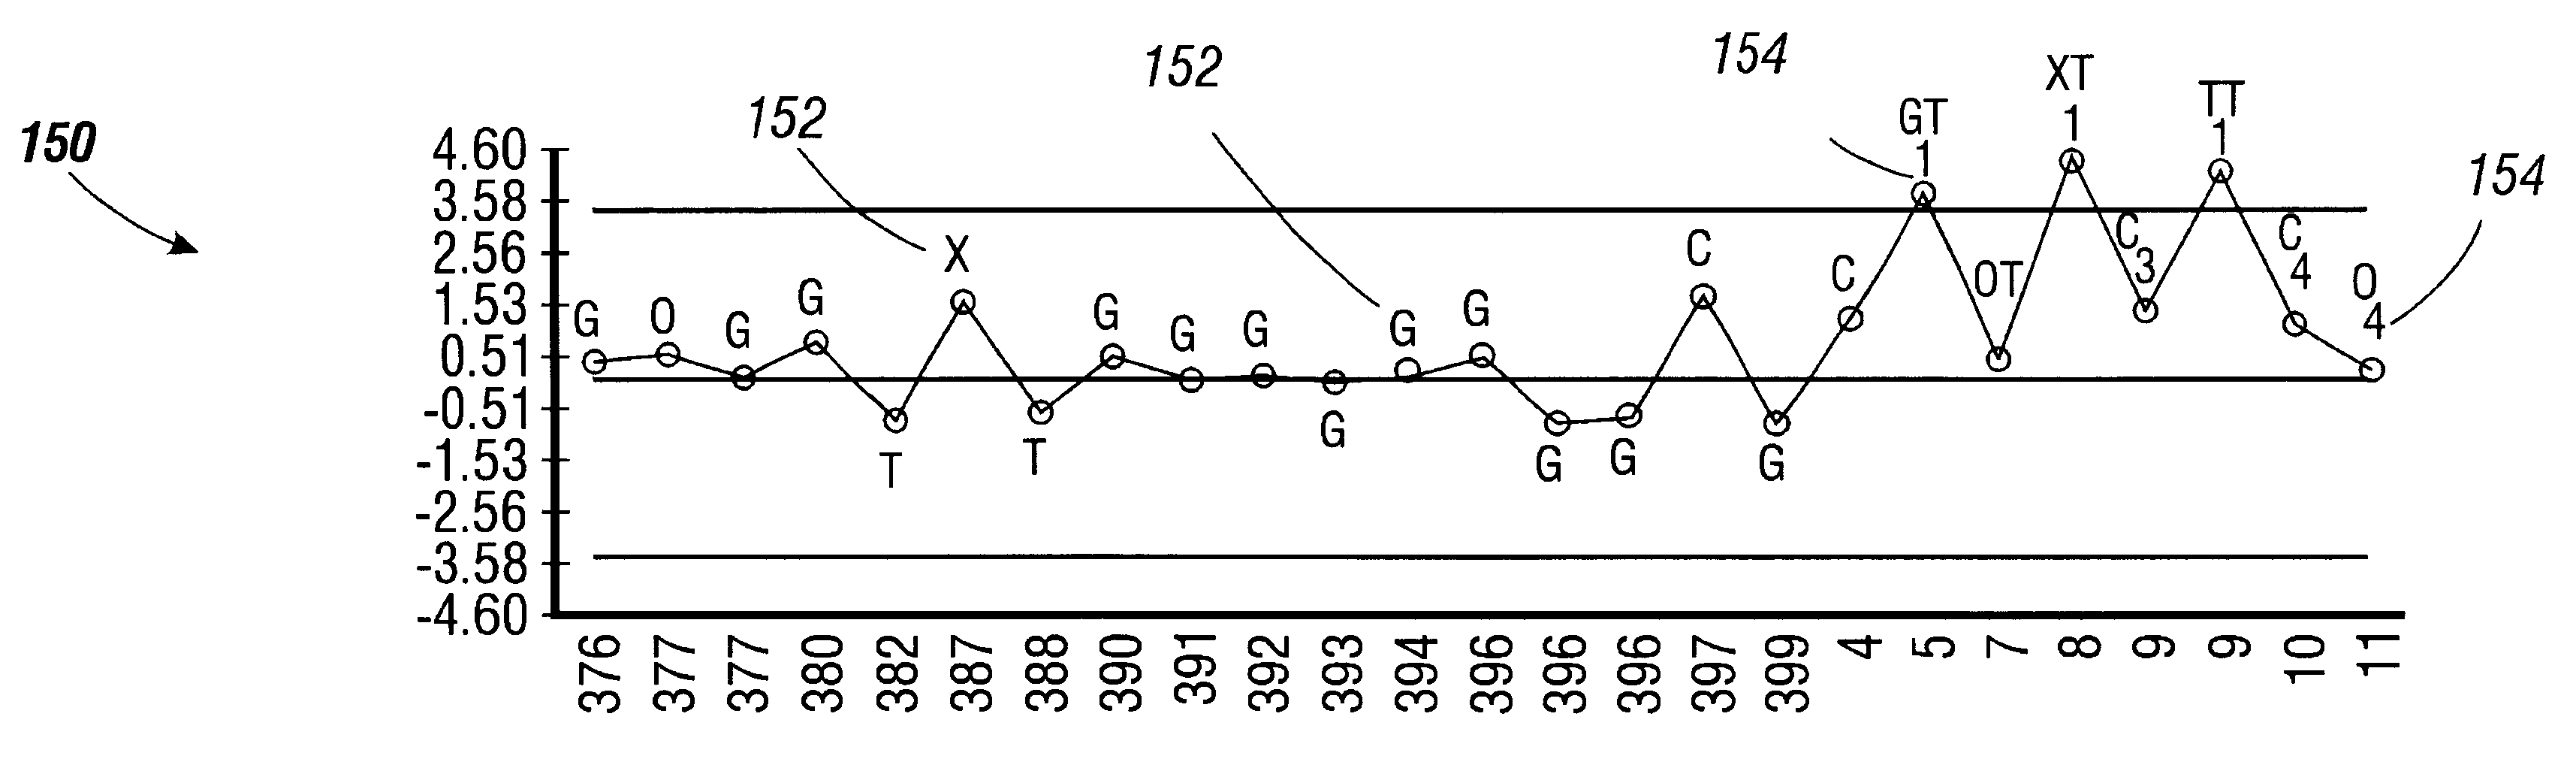 Statistical process control system with normalized control charting